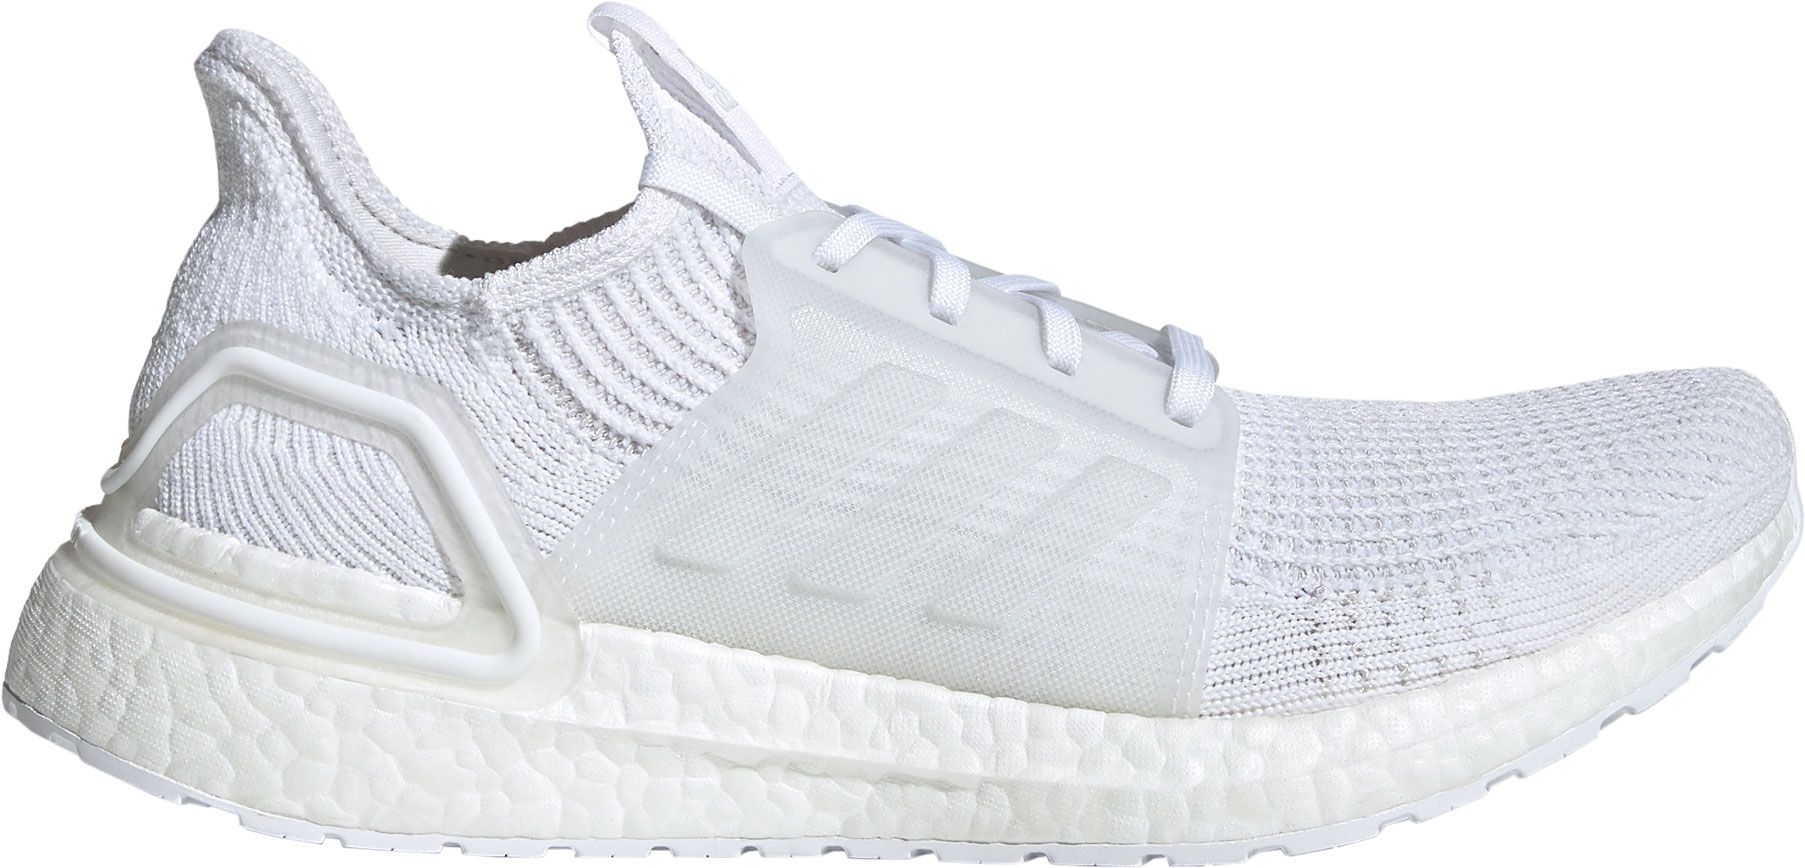 adidas Ultra Boost Size 9 Shoes Lowest Ask StockX